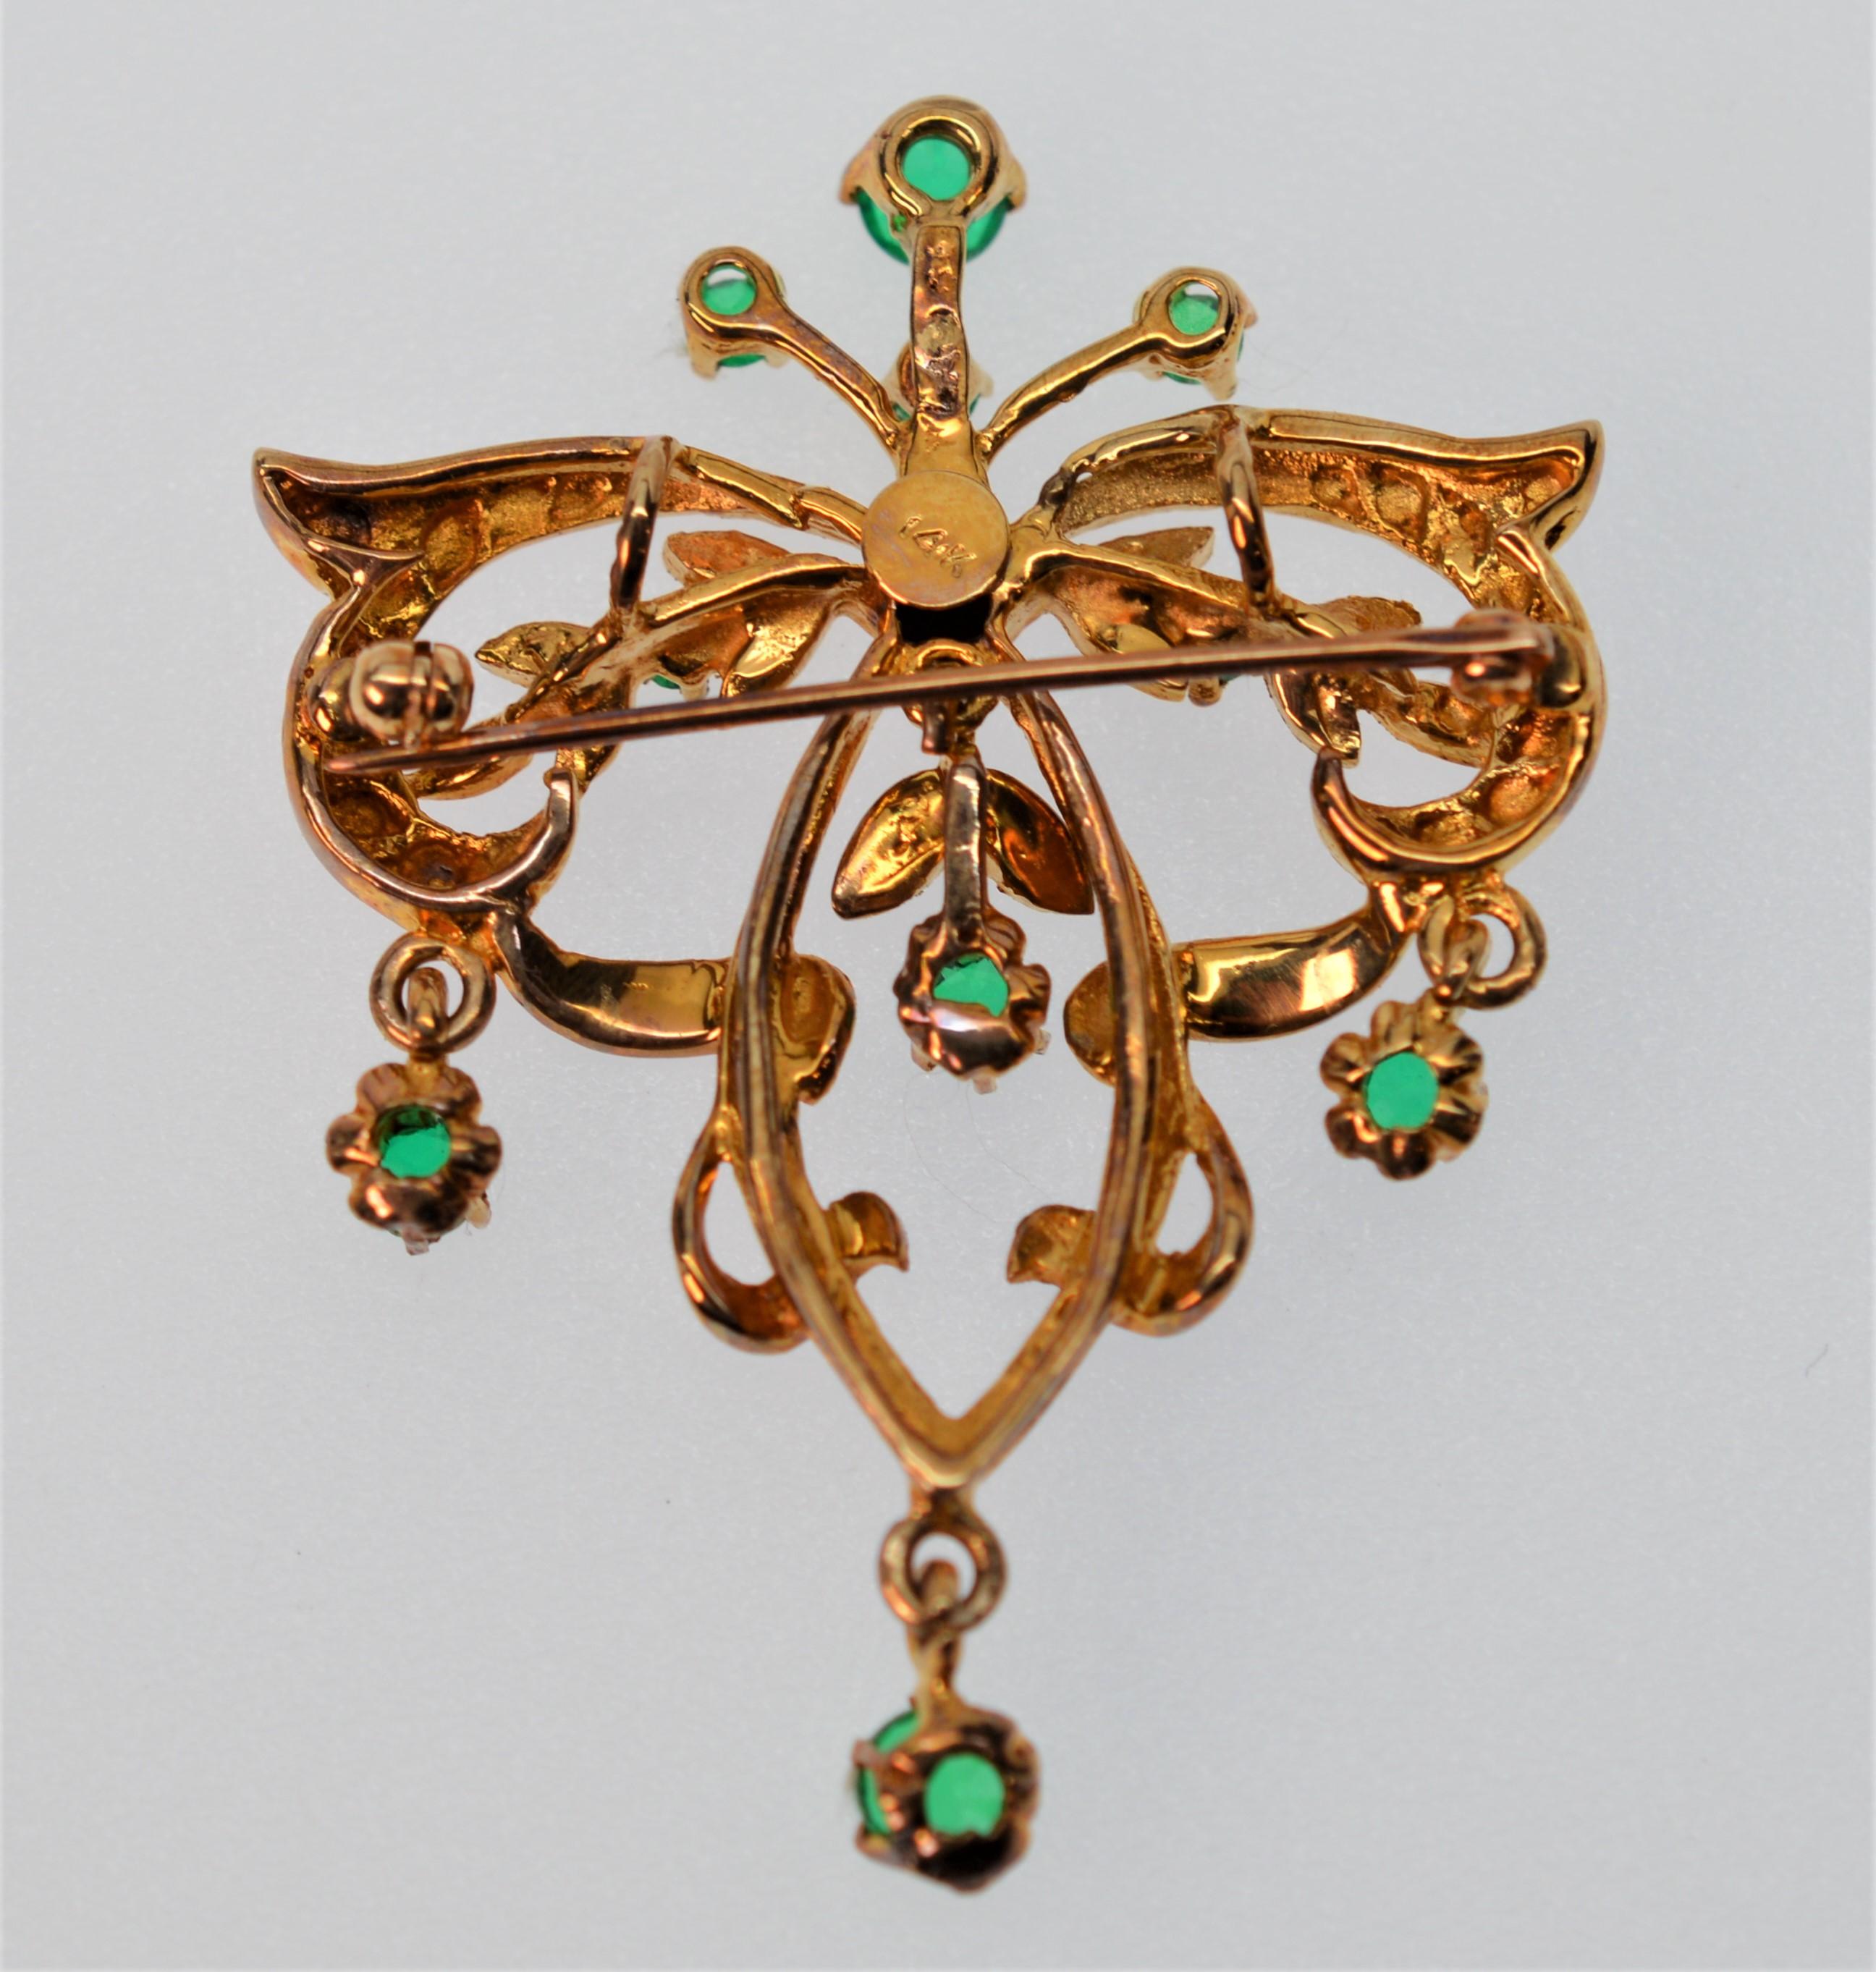 This antique style piece can be worn as a pin or pendant. Made of fourteen karat (14K) satin yellow gold, with a vintage look and style. The vivid green beryl doublets give a rich, classic look and the dangling stones give movement and life to the